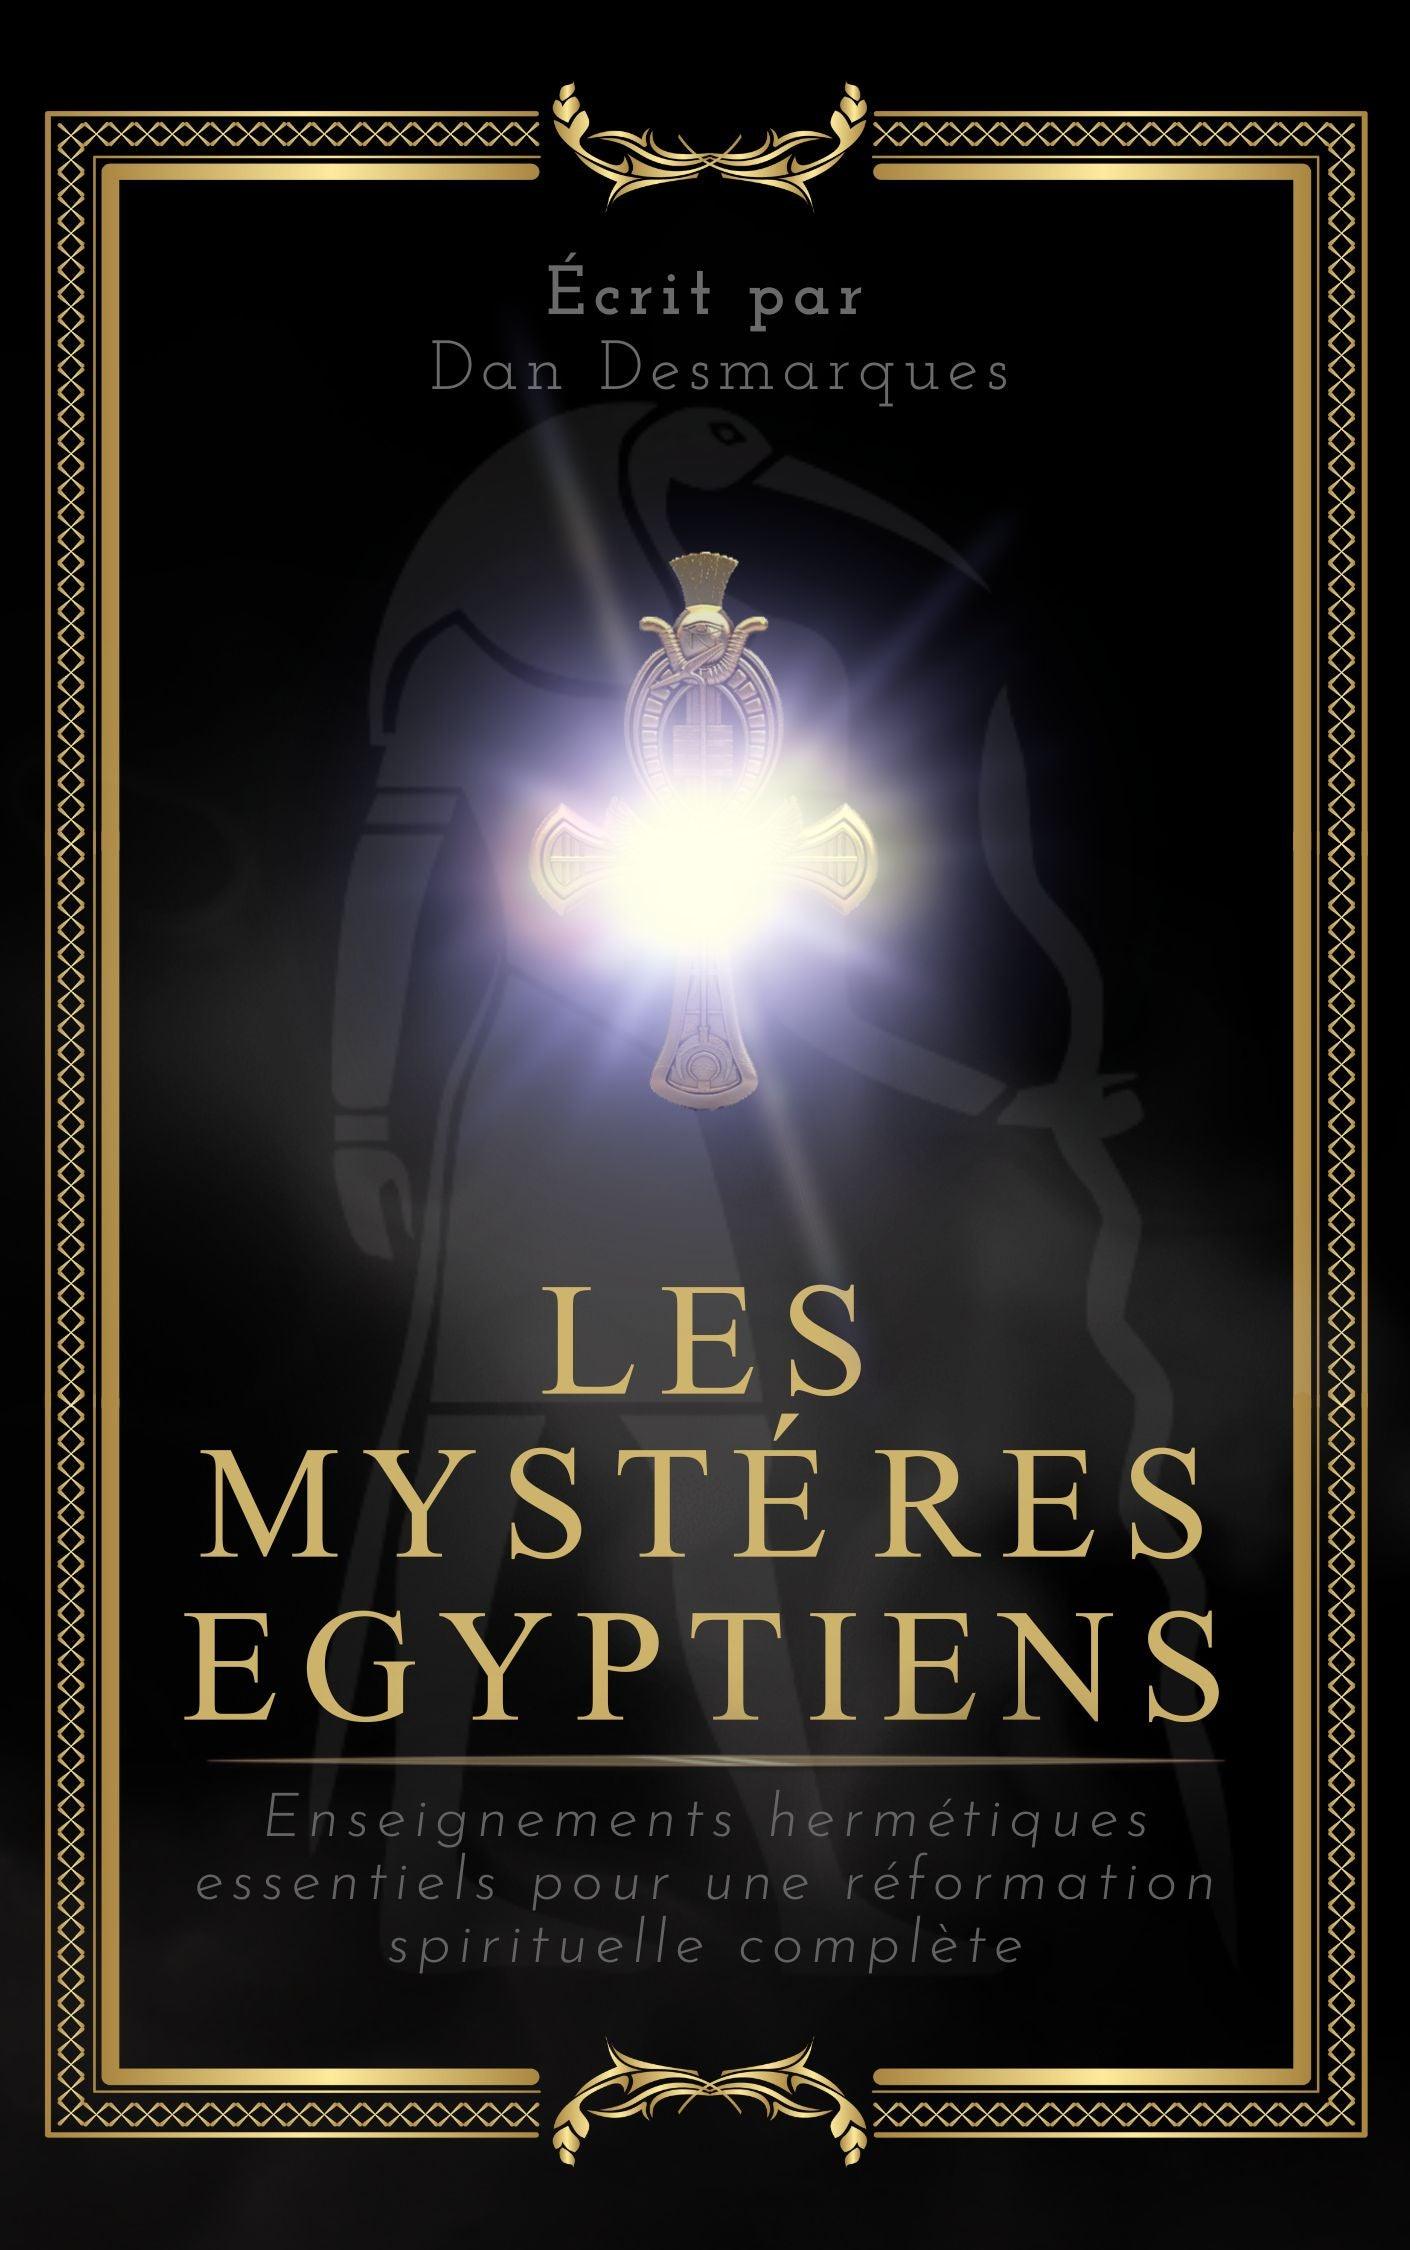 The Egyptian Mysteries French